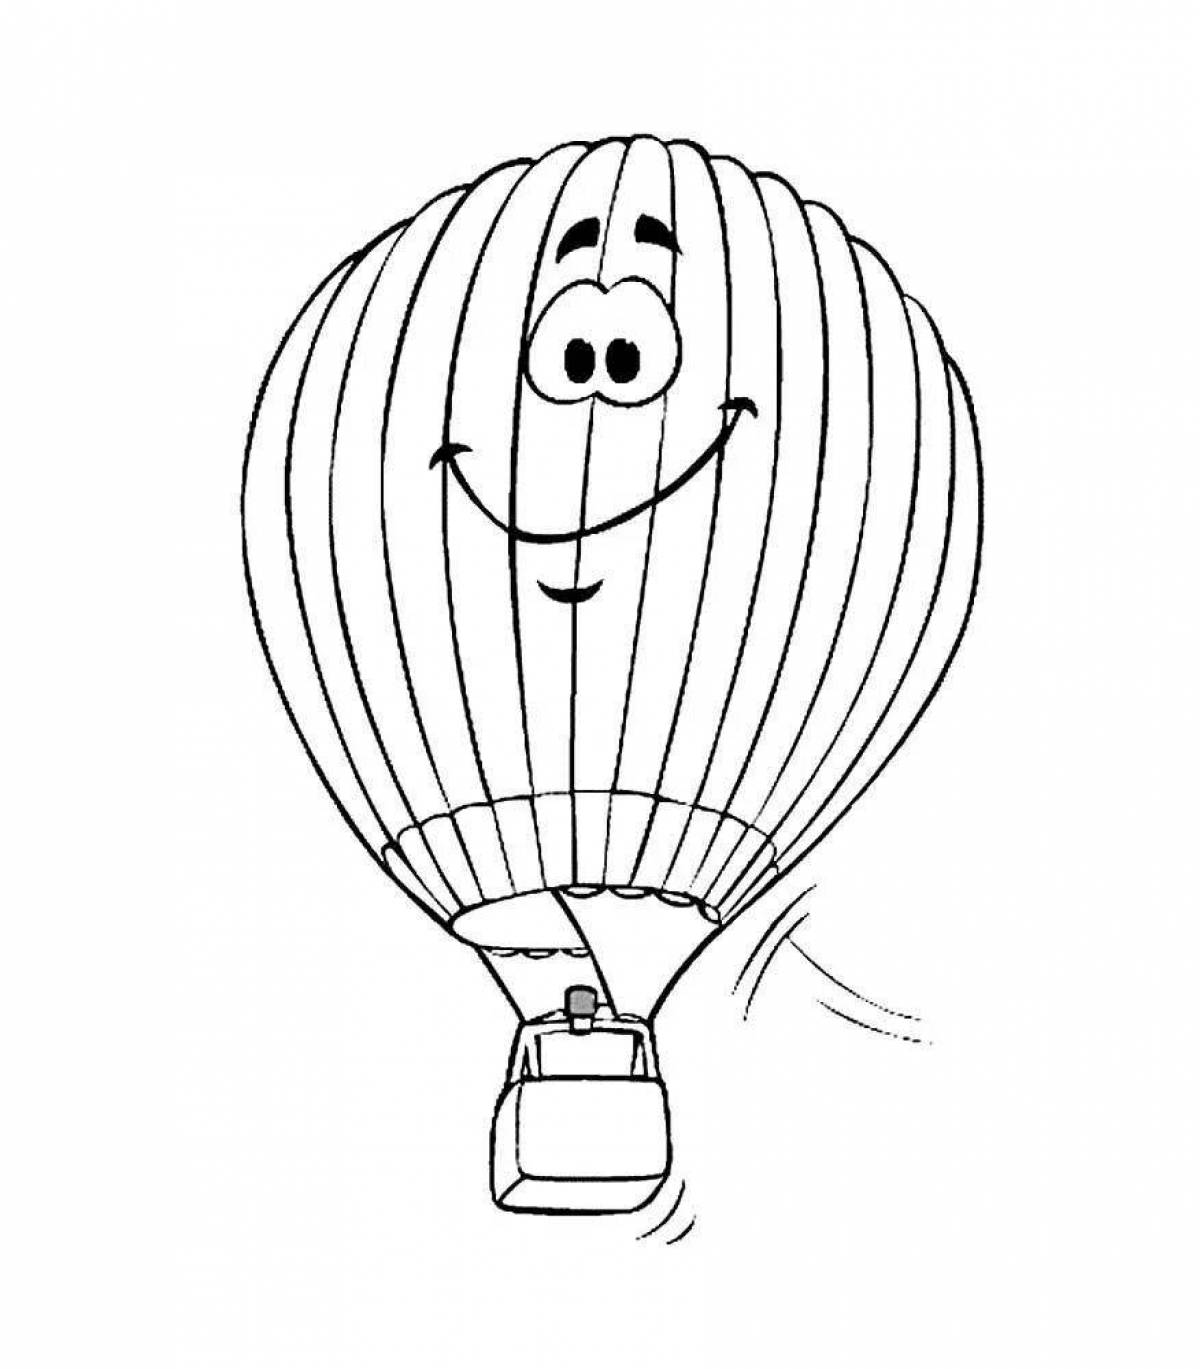 Coloring hot air balloon with basket for kids